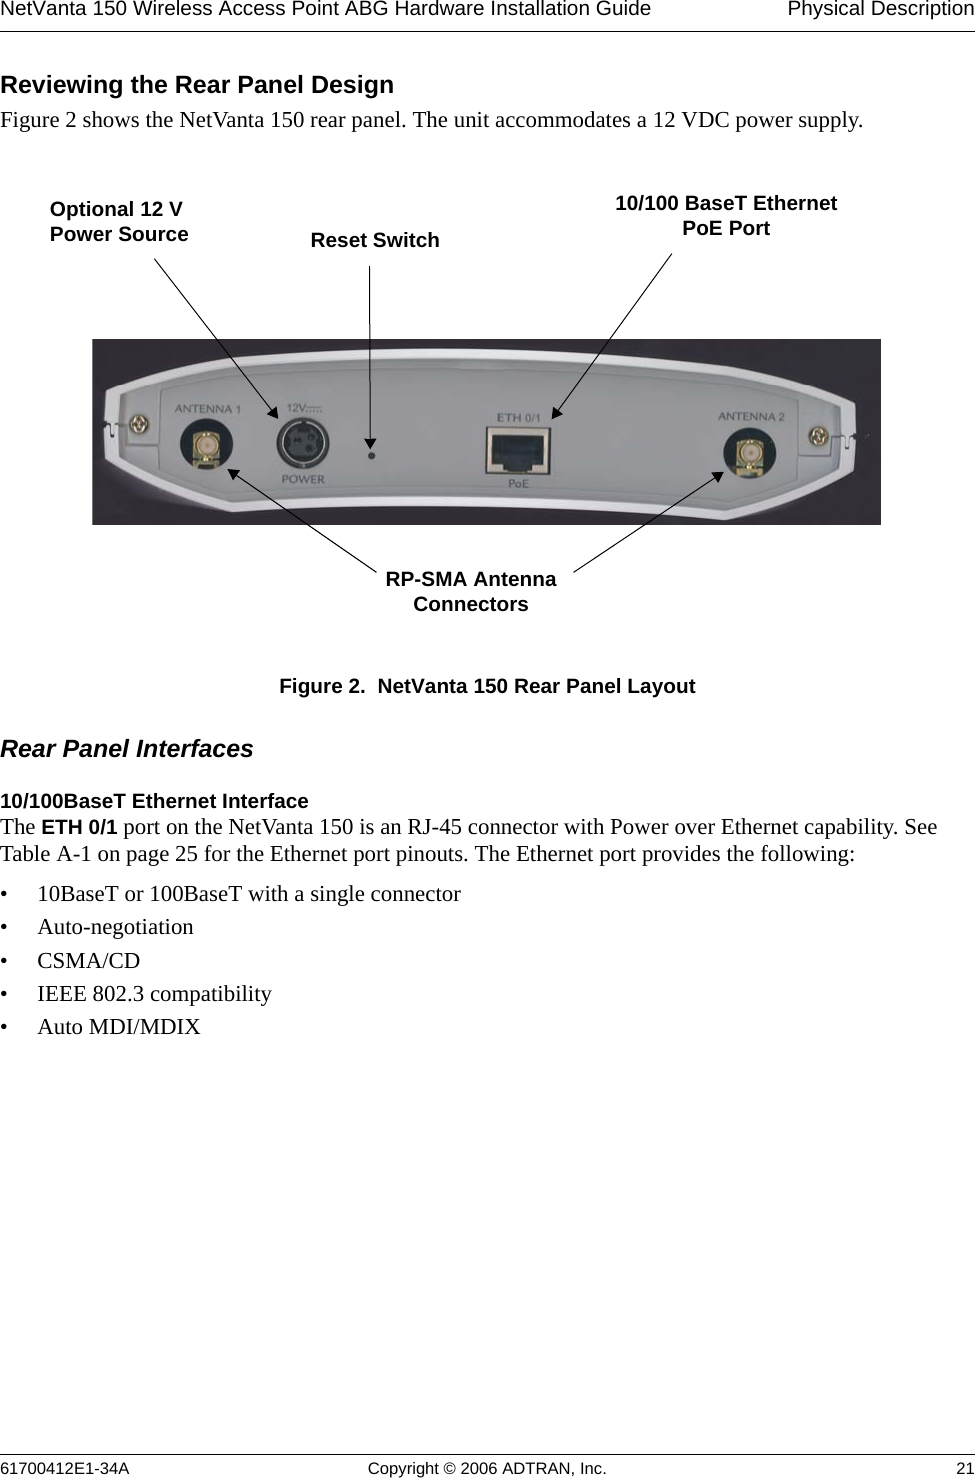 NetVanta 150 Wireless Access Point ABG Hardware Installation Guide  Physical Description61700412E1-34A Copyright © 2006 ADTRAN, Inc. 21Reviewing the Rear Panel DesignFigure 2 shows the NetVanta 150 rear panel. The unit accommodates a 12 VDC power supply.Figure 2.  NetVanta 150 Rear Panel LayoutRear Panel Interfaces10/100BaseT Ethernet InterfaceThe ETH 0/1 port on the NetVanta 150 is an RJ-45 connector with Power over Ethernet capability. See Table A-1 on page 25 for the Ethernet port pinouts. The Ethernet port provides the following:• 10BaseT or 100BaseT with a single connector• Auto-negotiation•CSMA/CD• IEEE 802.3 compatibility• Auto MDI/MDIXReset Switch10/100 BaseT Ethernet PoE PortOptional 12 VPower SourceRP-SMA Antenna Connectors